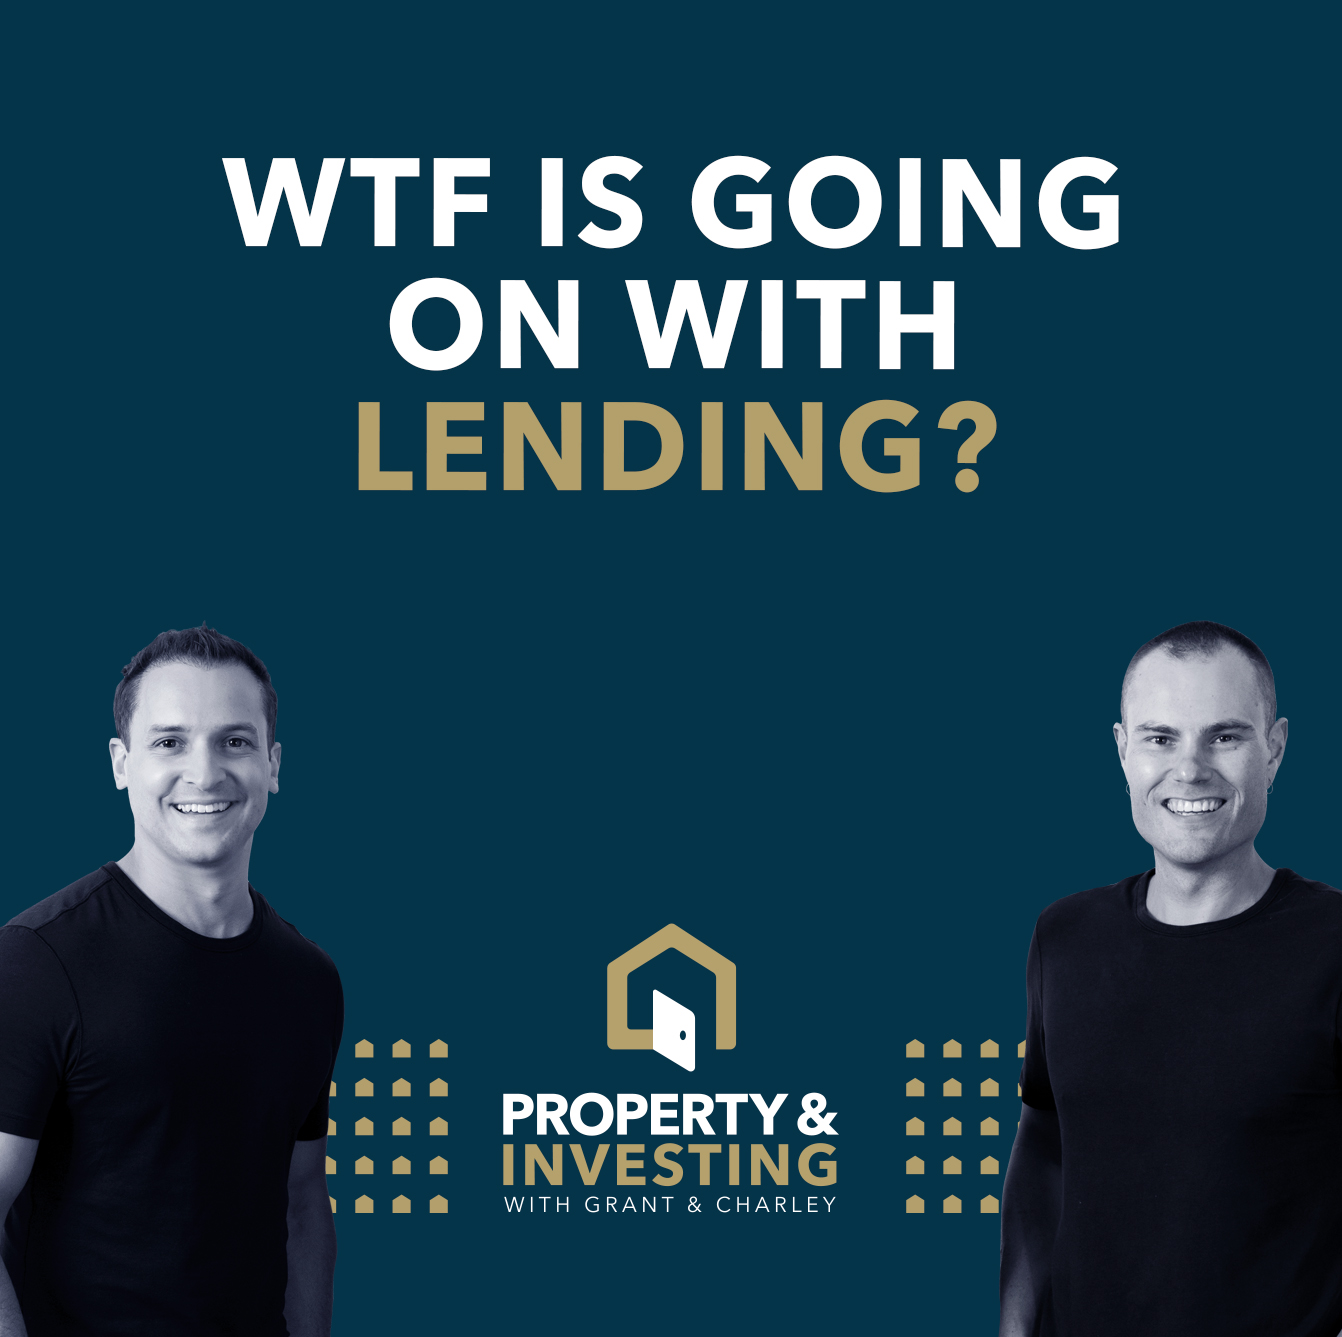 WTF is going on with lending?